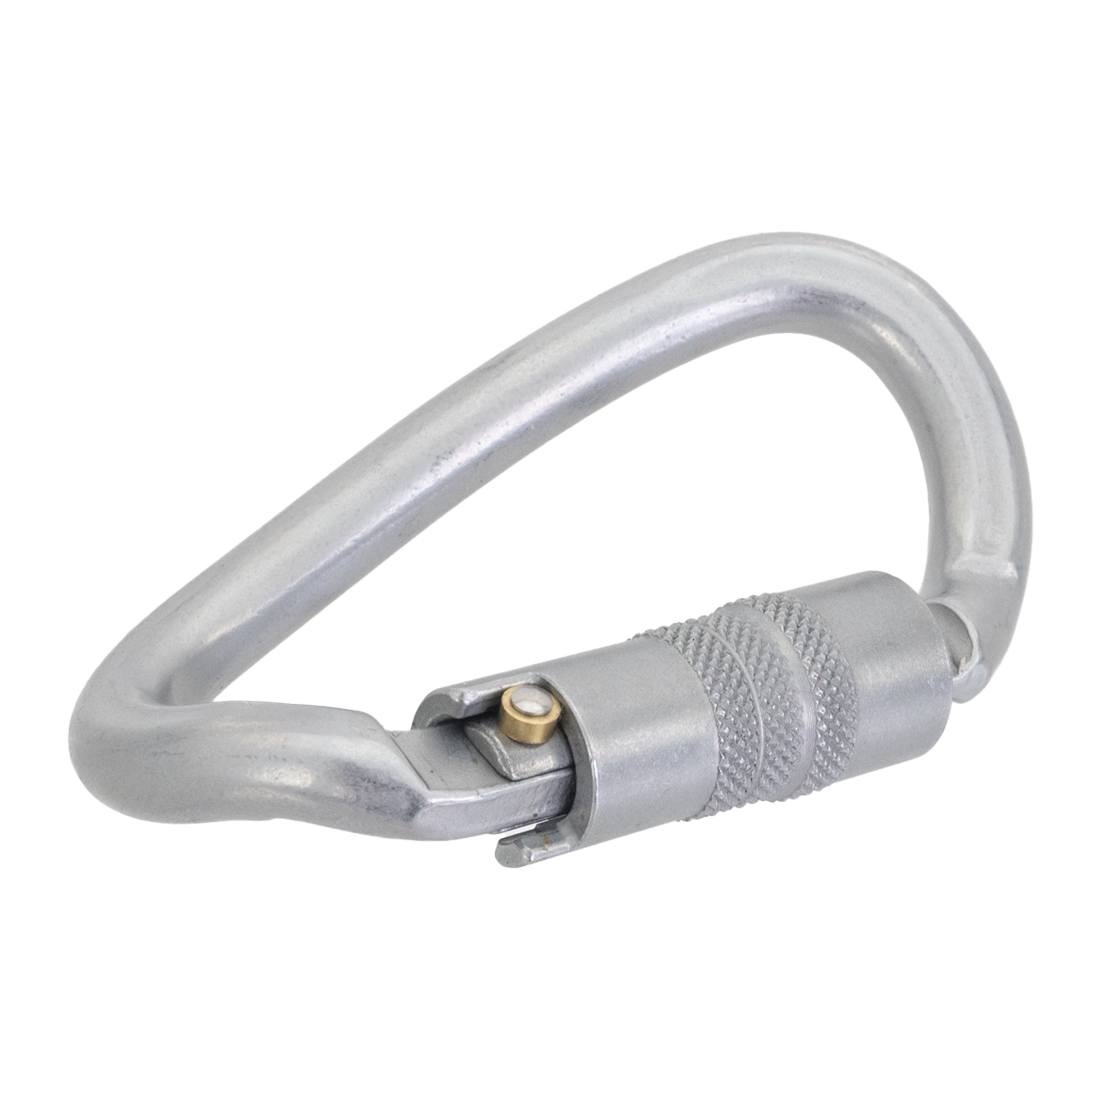 KONG DNA Carabiner - Ovalone Twist Lock ANSI Right View